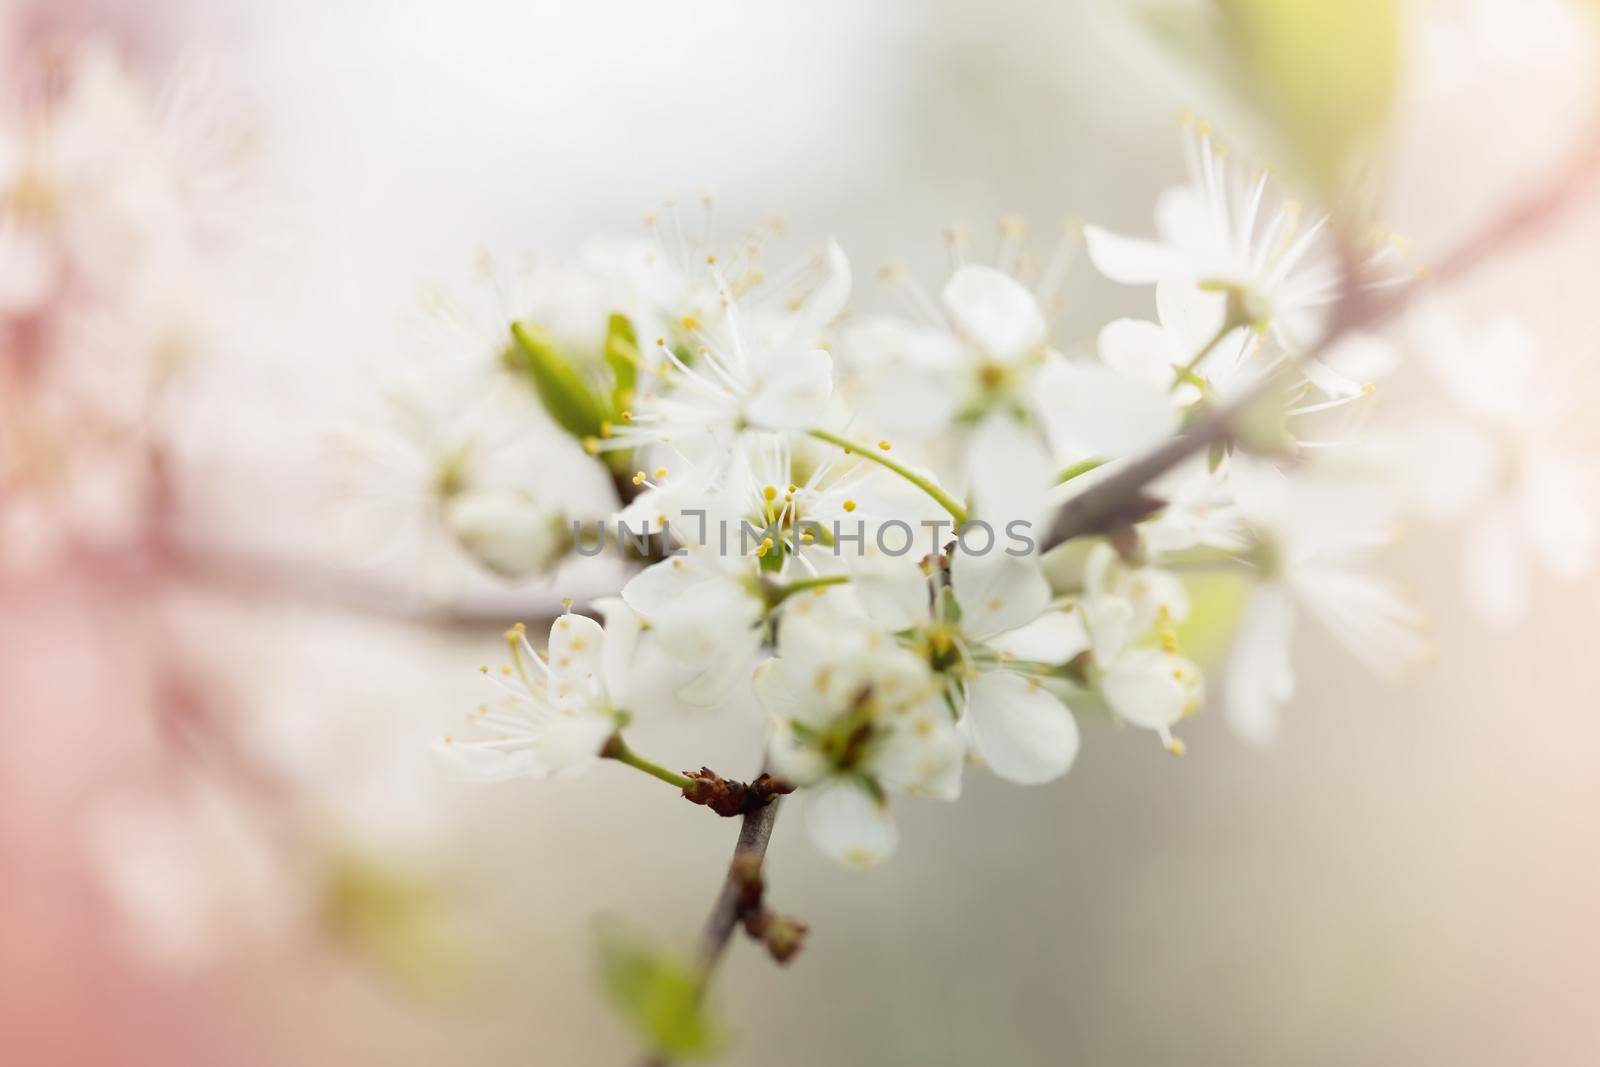 Defocused floral background with cherry blossoms on green leaves by galinasharapova